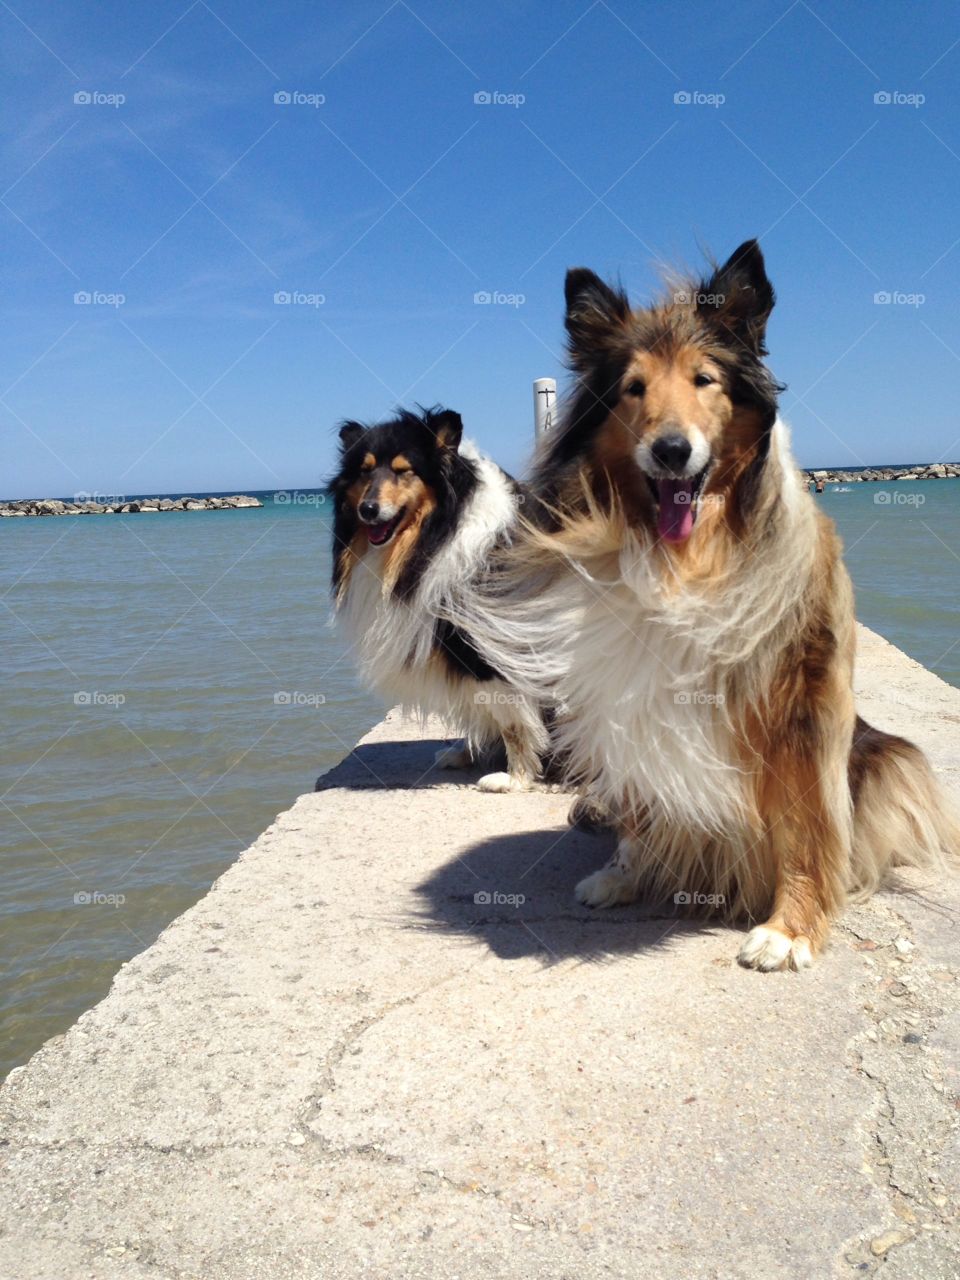 Collies in the Sub. Lassie and Candy on the pier at the beach!